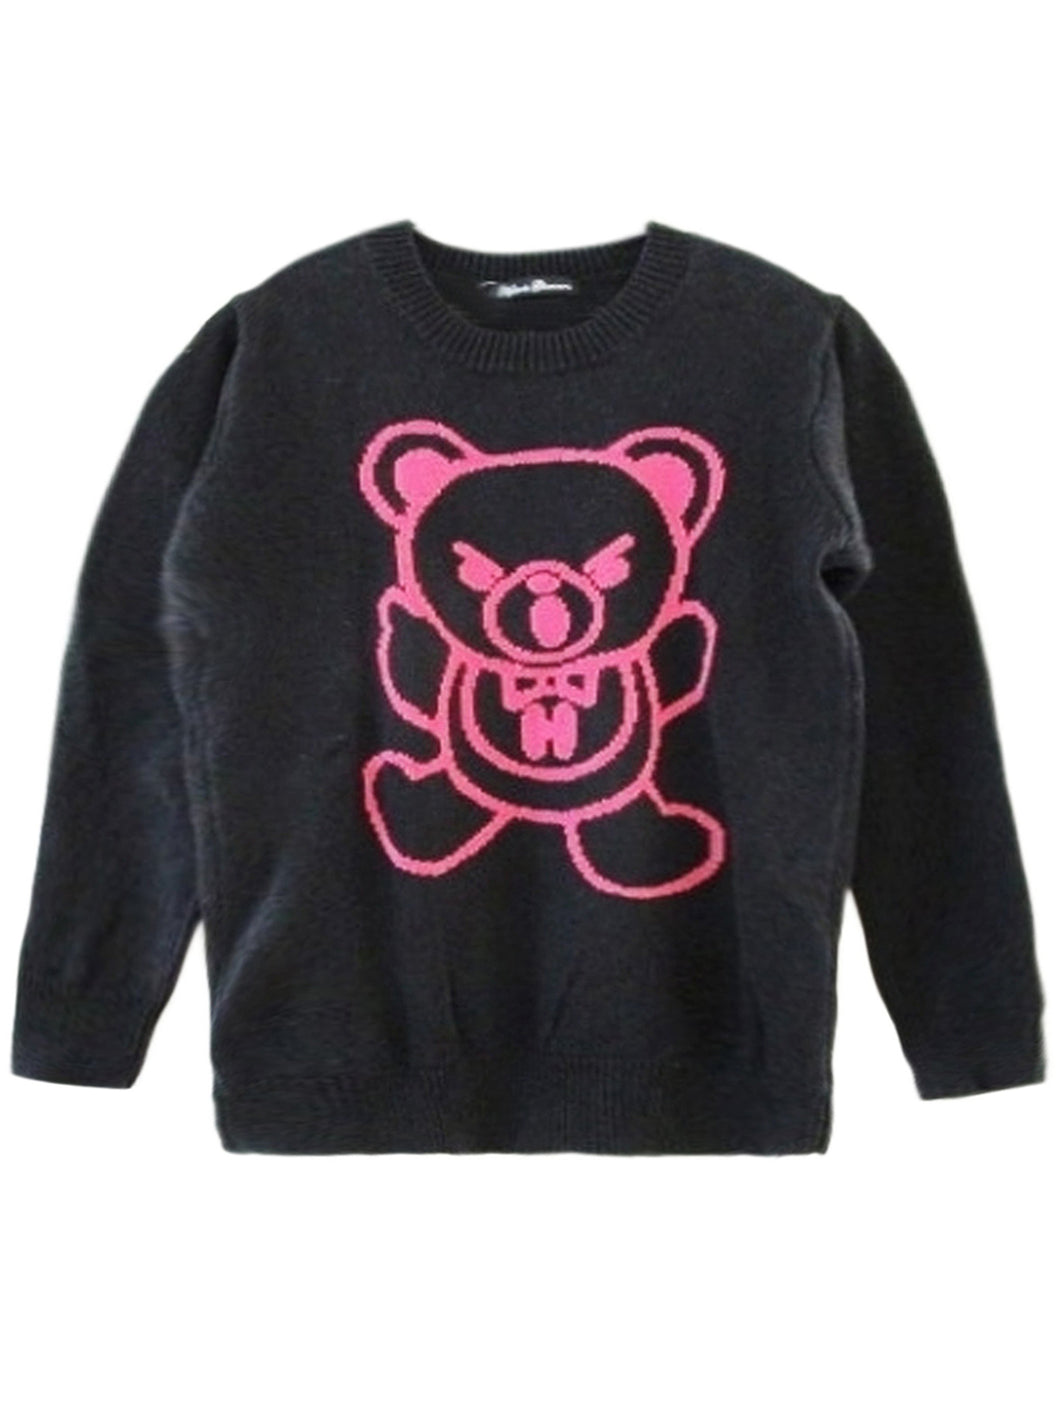 Hysteric Glamour **** Bear Knit Sweater